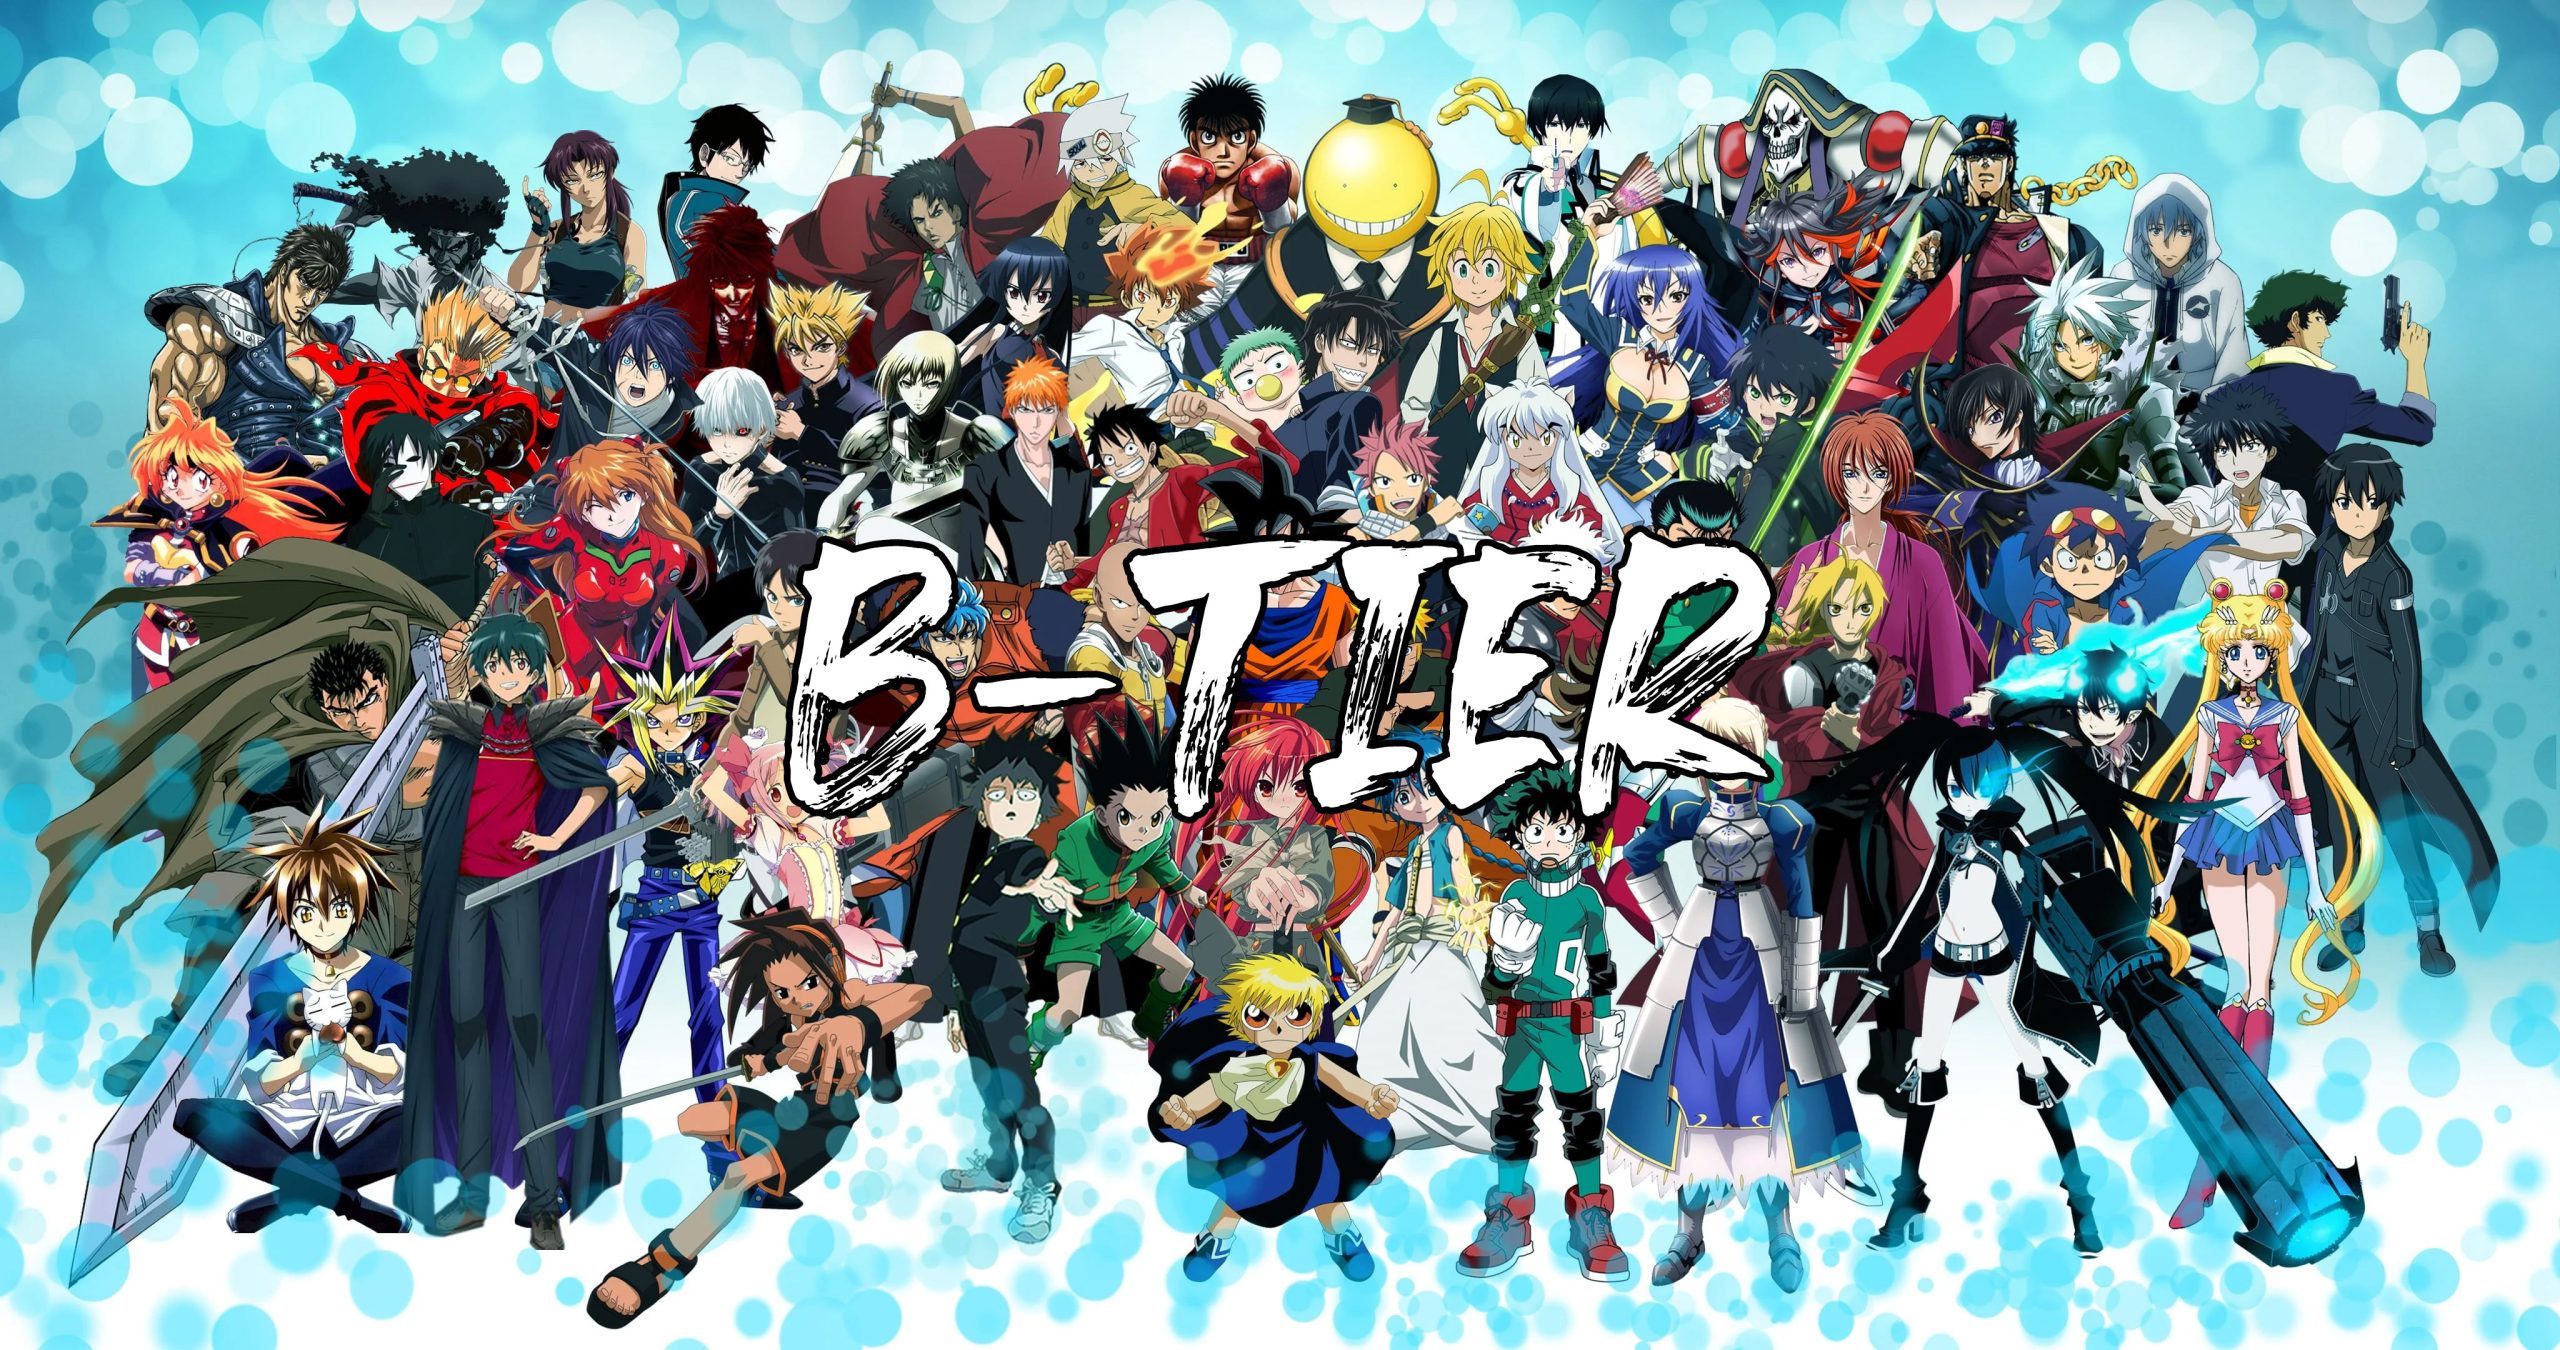 Anime Character Tier List: The Ultimate Ranking - TopTierList